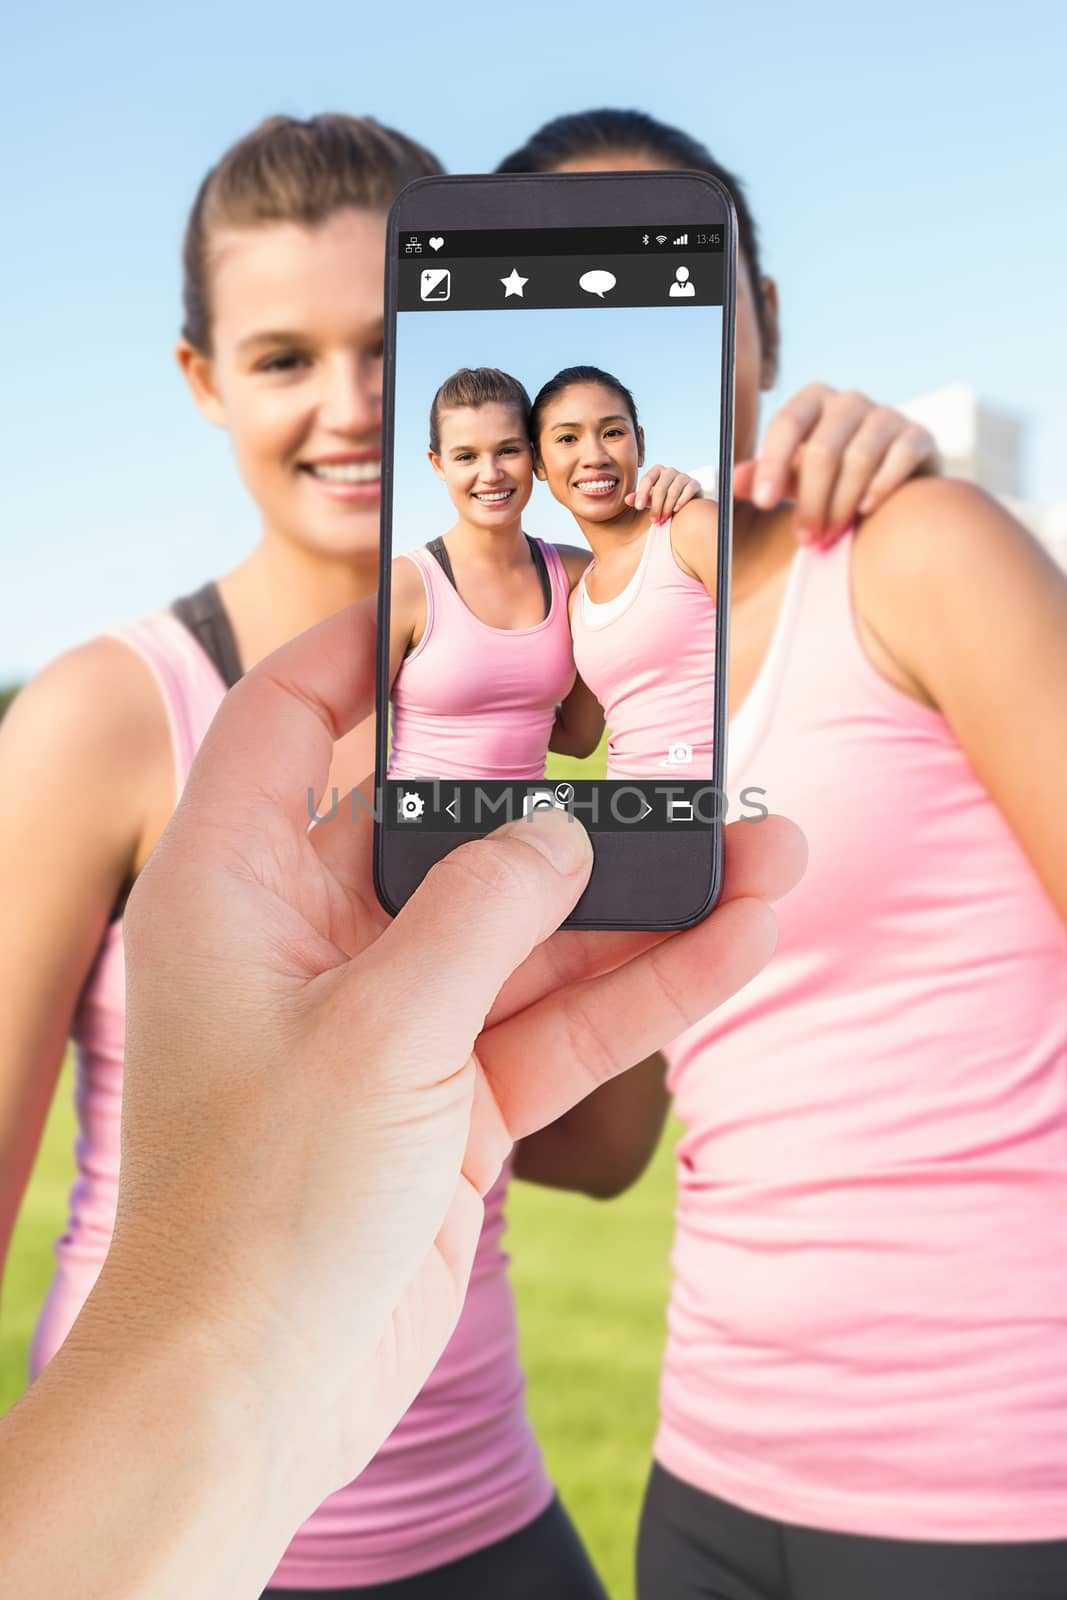 Female hand holding a smartphone against two smiling women wearing pink for breast cancer